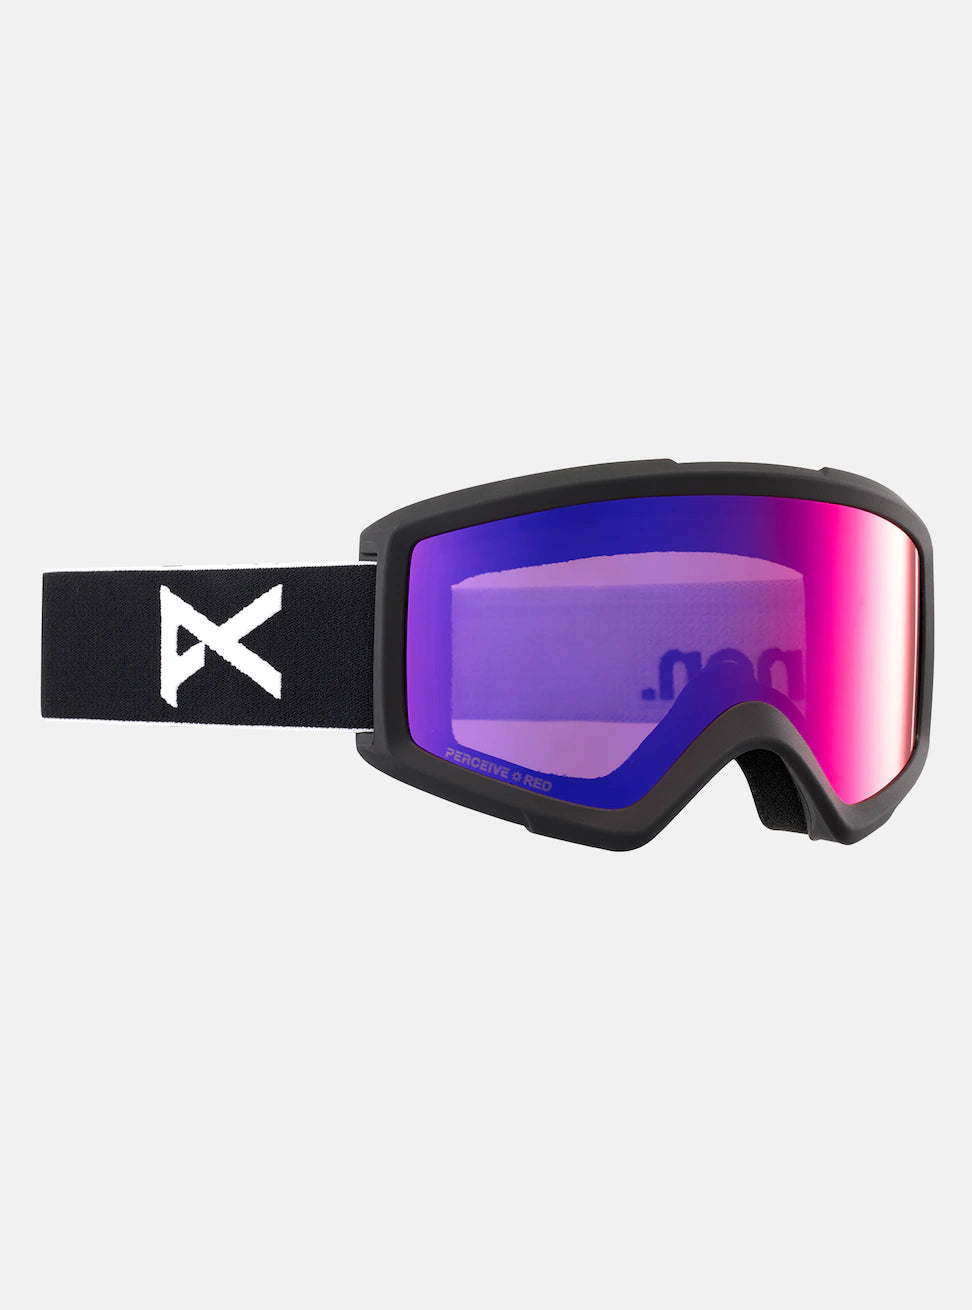 Helix 2.0 Goggles Black + Sunny Red Lens